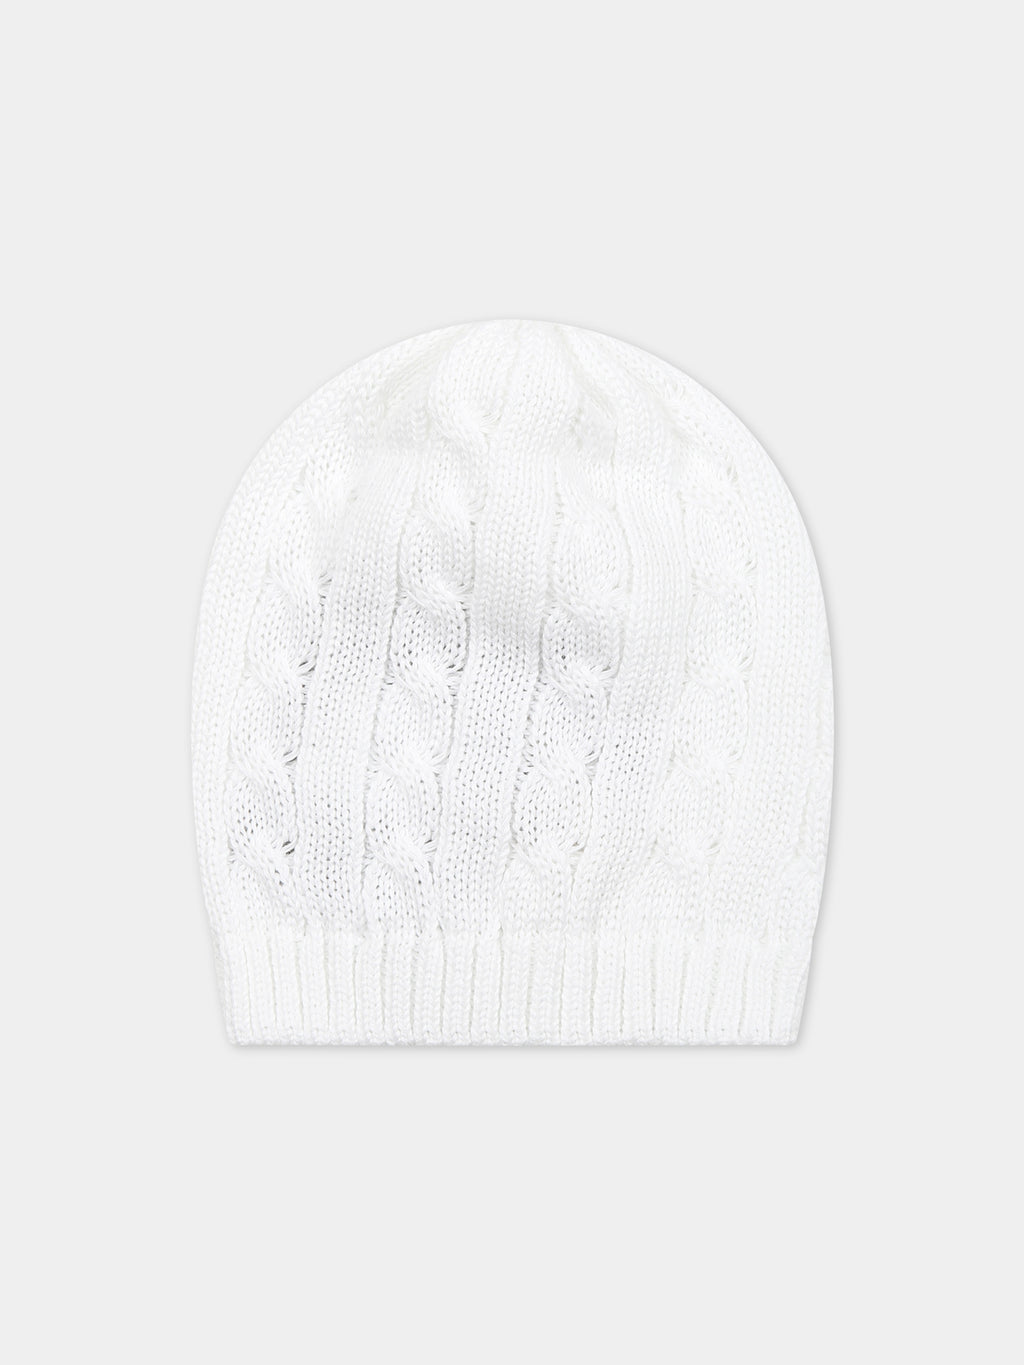 White hat for baby kids